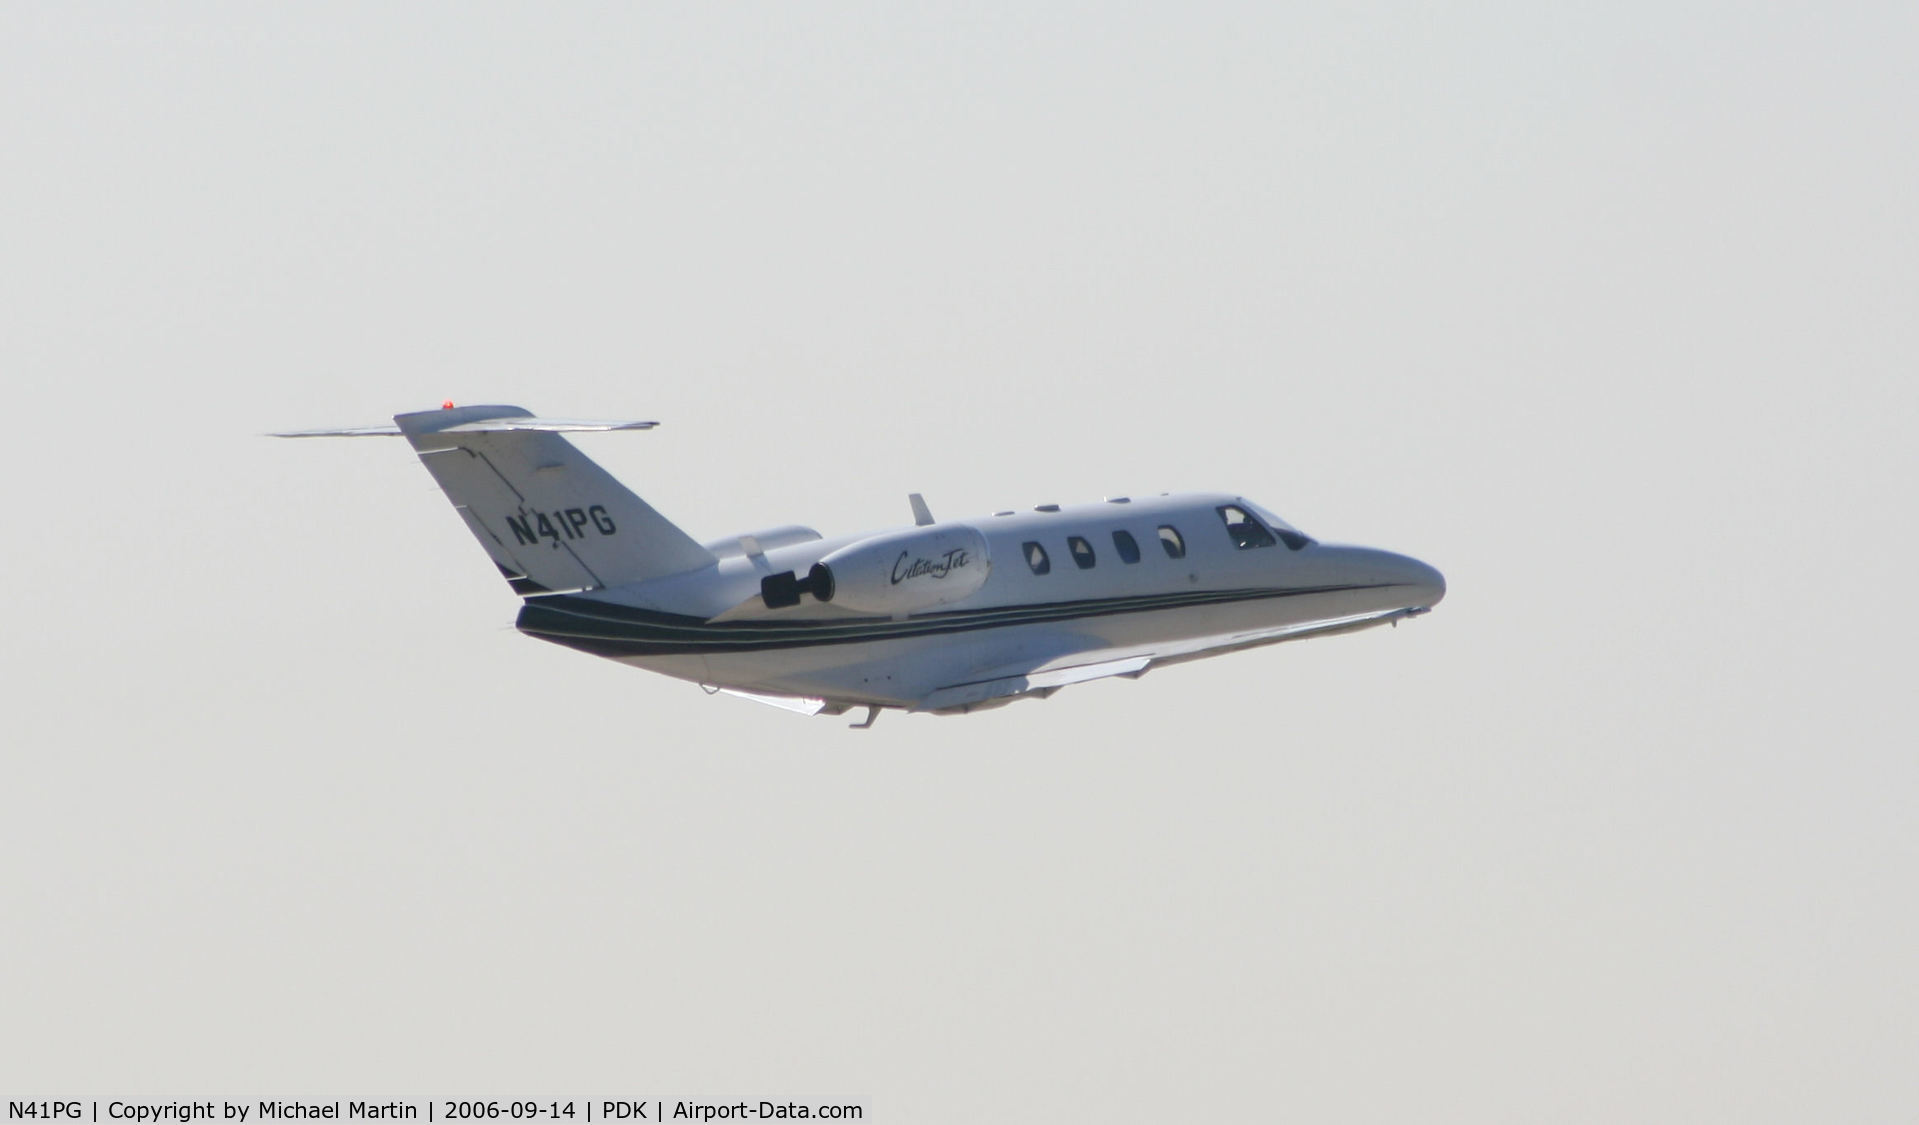 N41PG, 1997 Cessna 525 C/N 525-0175, Gear up after take off from 20L